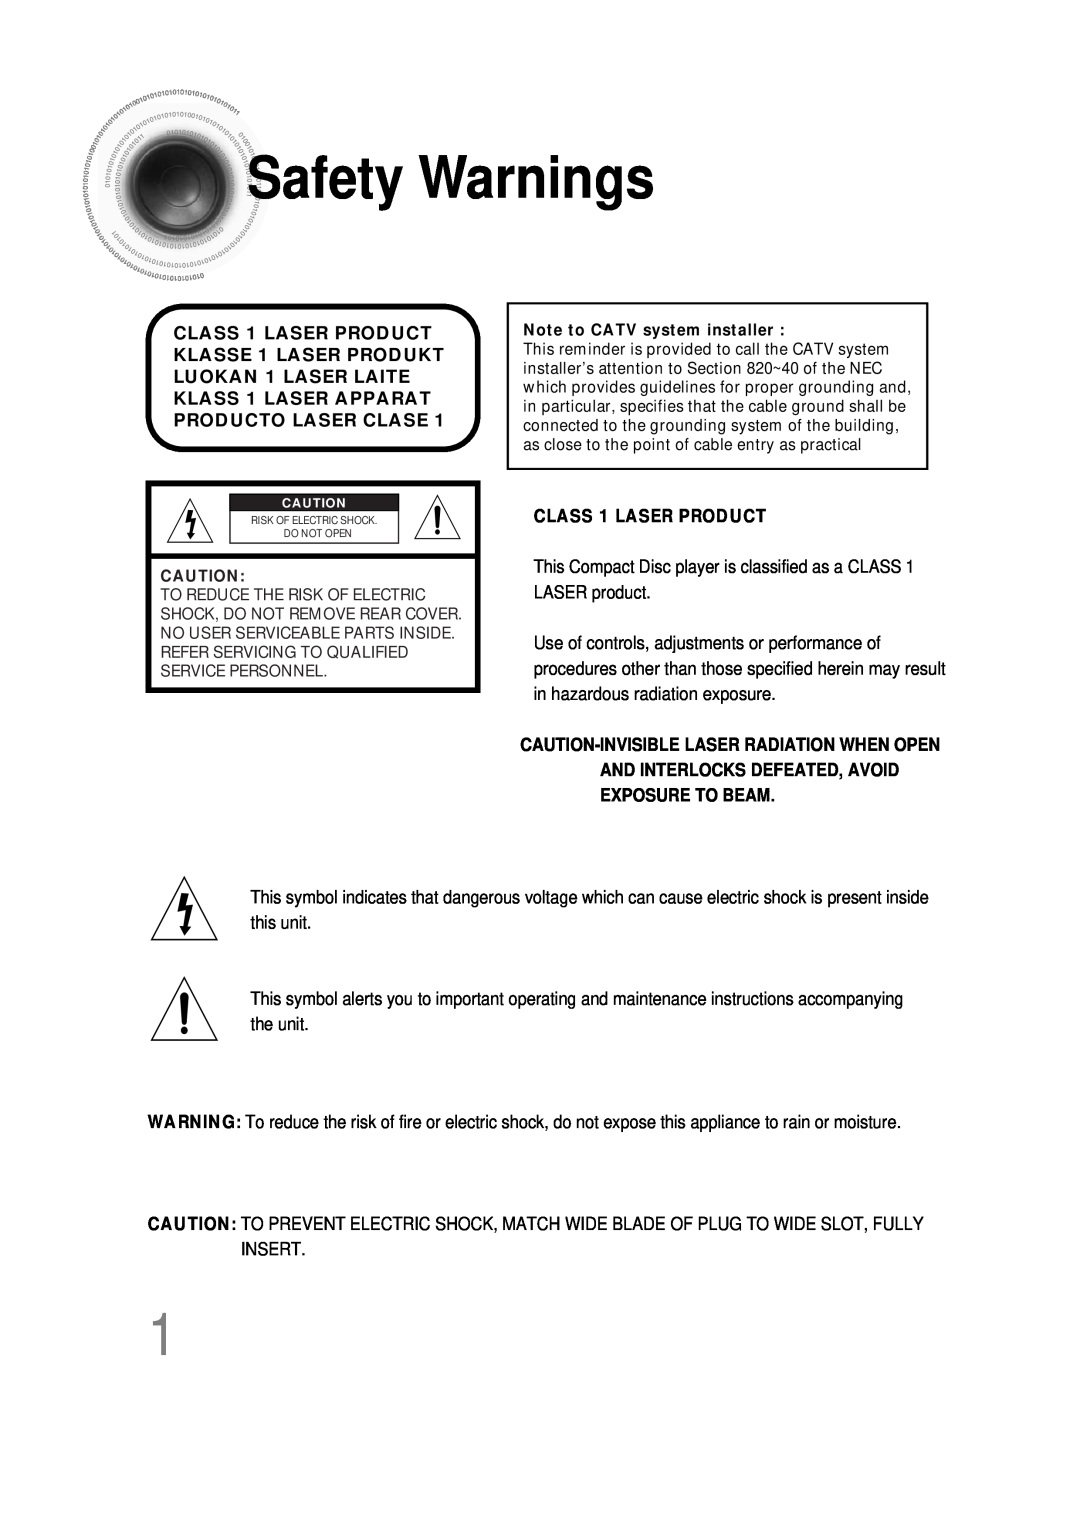 Samsung AH68-01493X, HT-DS665T, 20051111115925328 instruction manual Safety Warnings, CLASS 1 LASER PRODUCT 